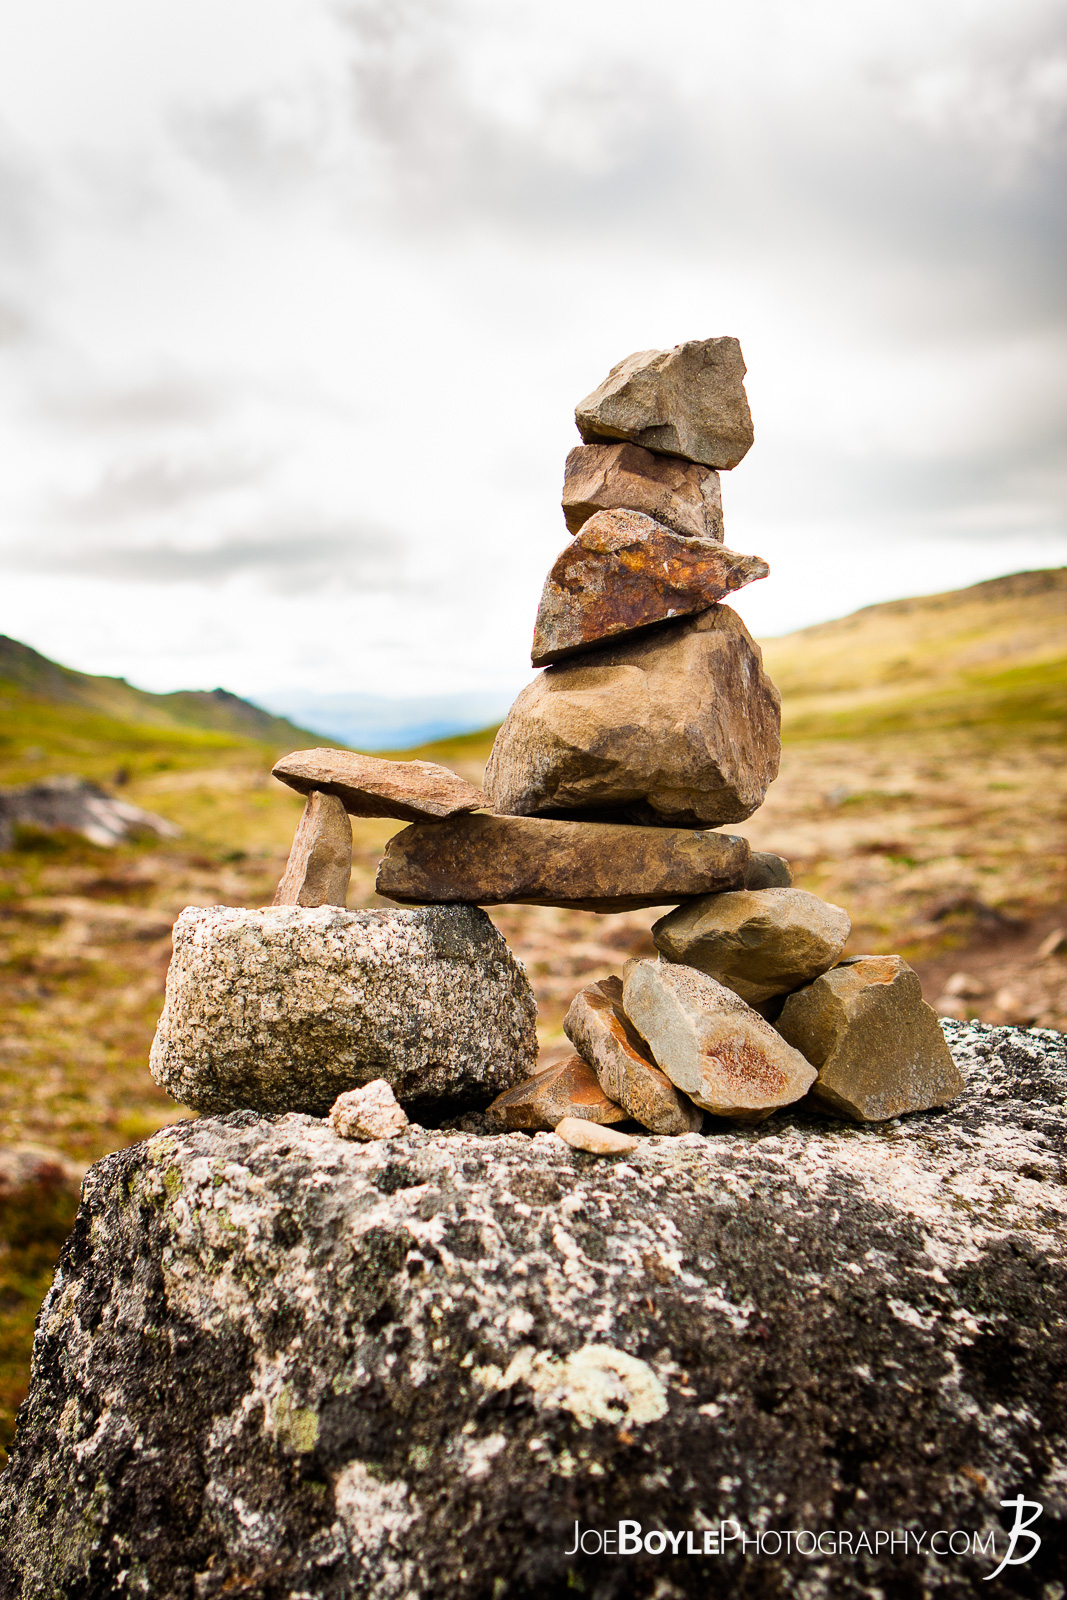  My buddy and I were hiking the Kesugi Ridge Trail and their were many cairns along the way. I thought this one looked pretty sweet so I took a photo of it! 